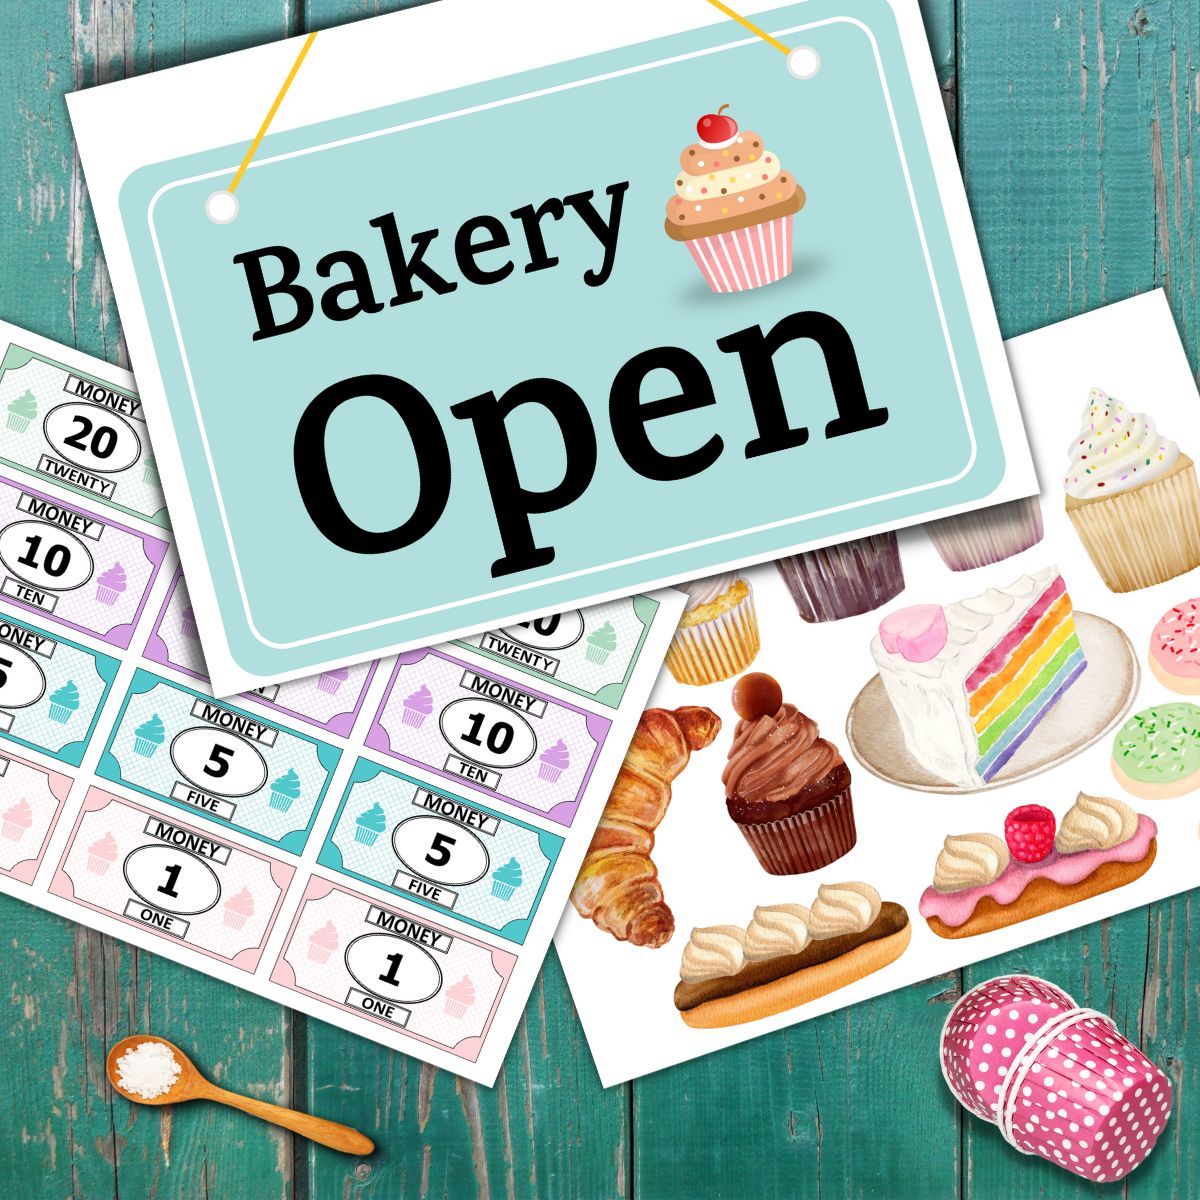 Several bakery dramatic play free printable pages on a table incuding an open sign, play money, and printable desserts.